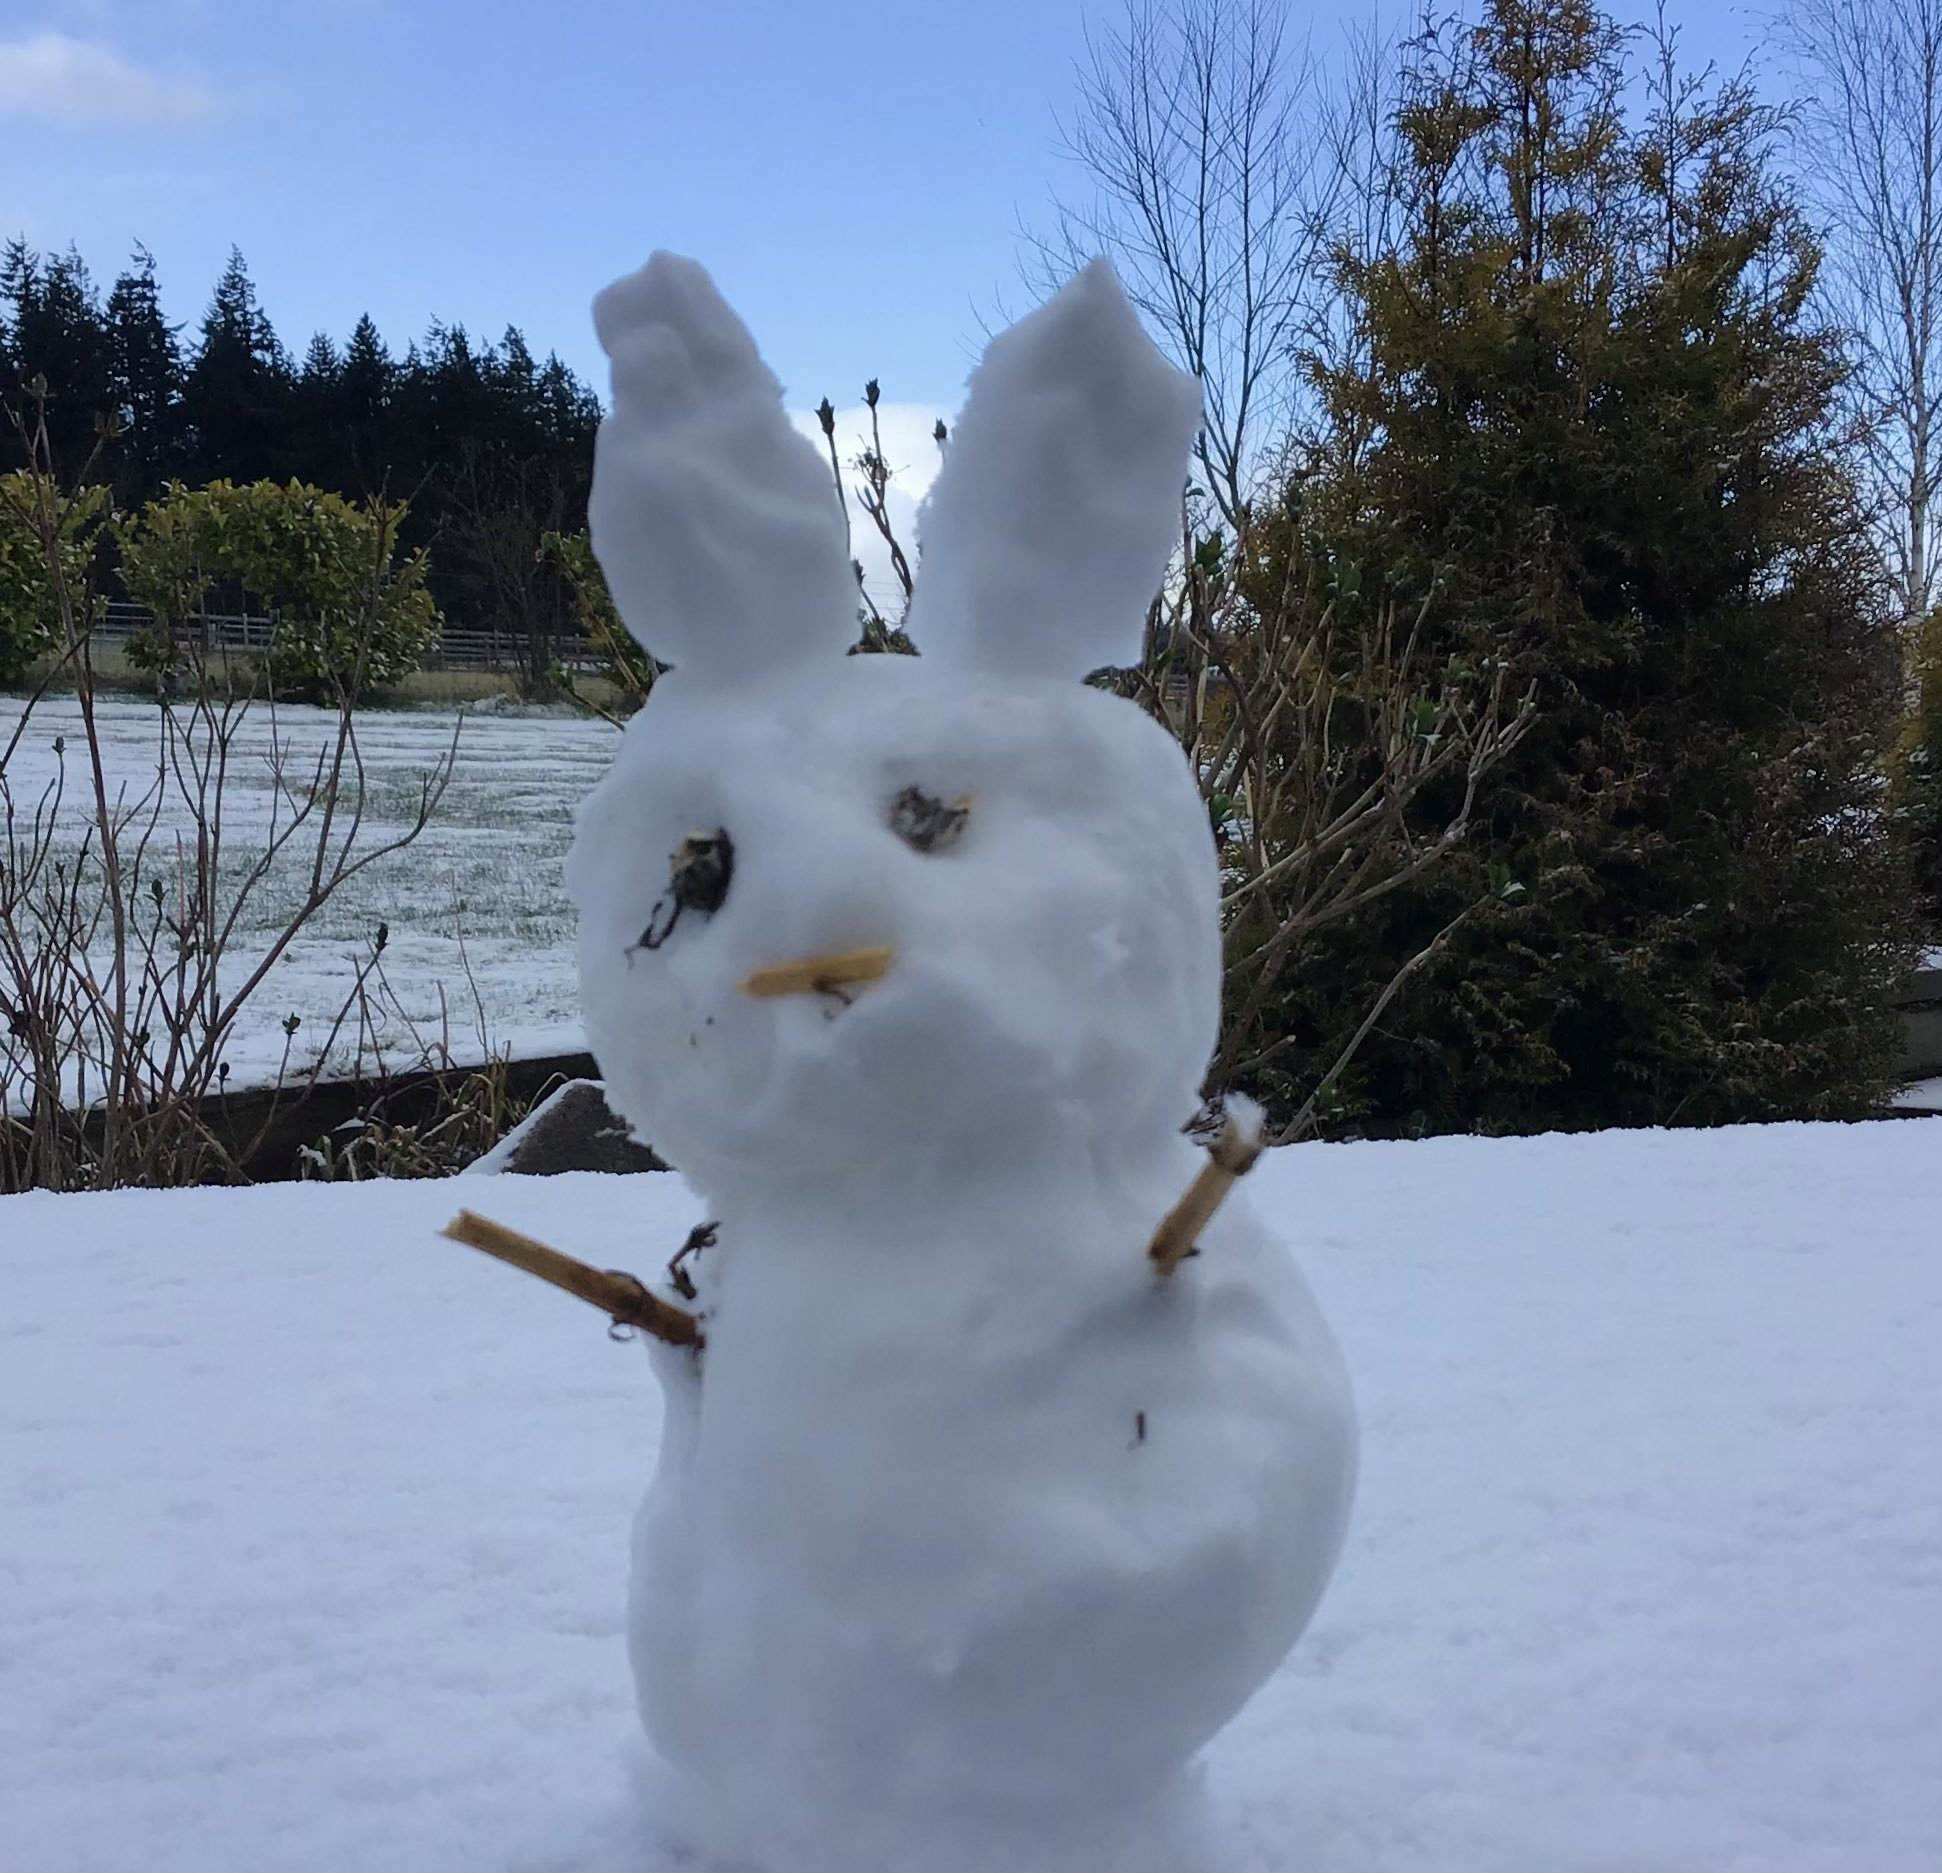 An Inverness family built a snow bunny on Easter Monday morning.